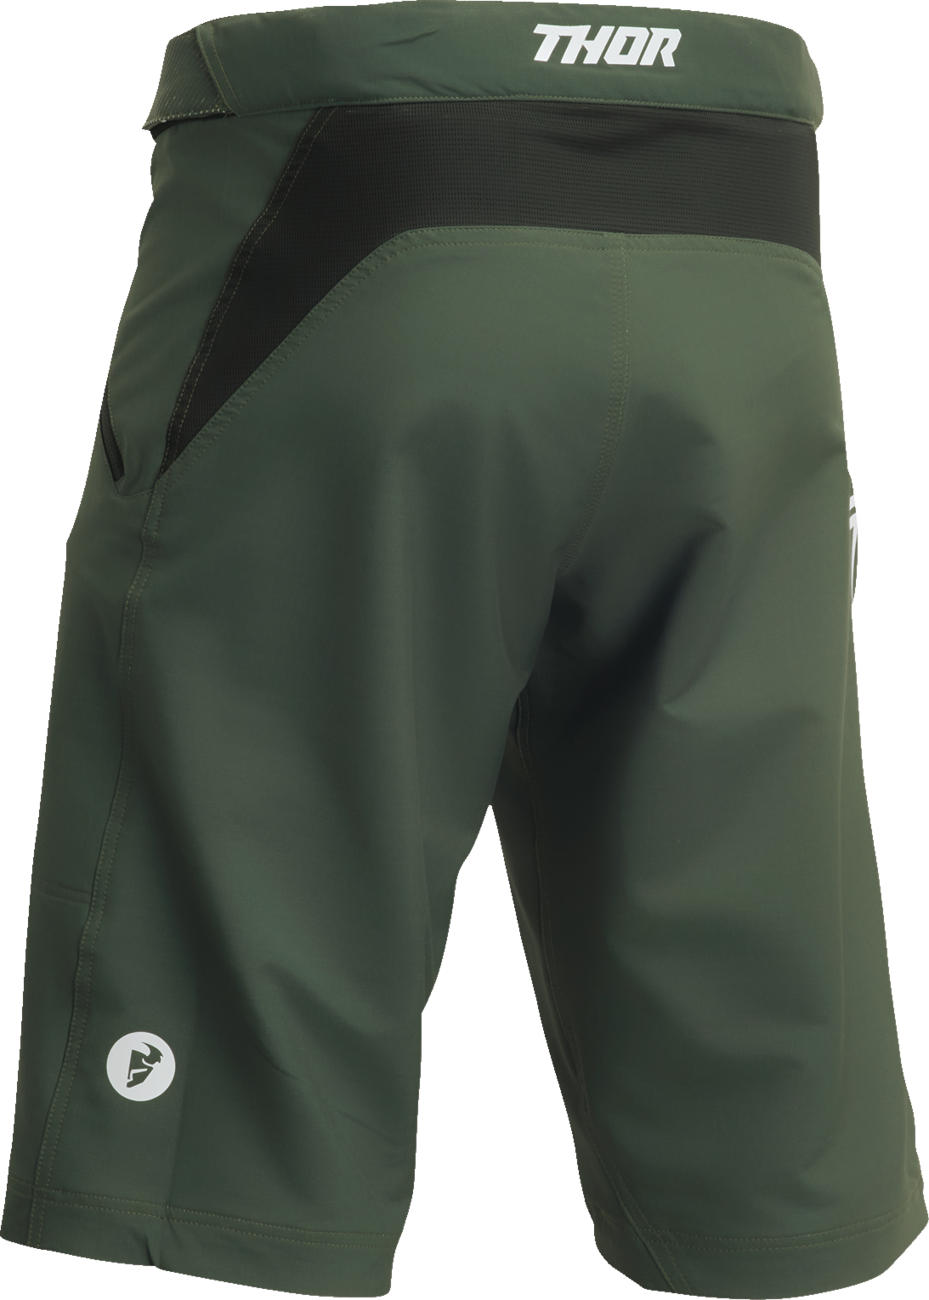 THOR Intense Shorts - Forest Green - US 36 5001-0292